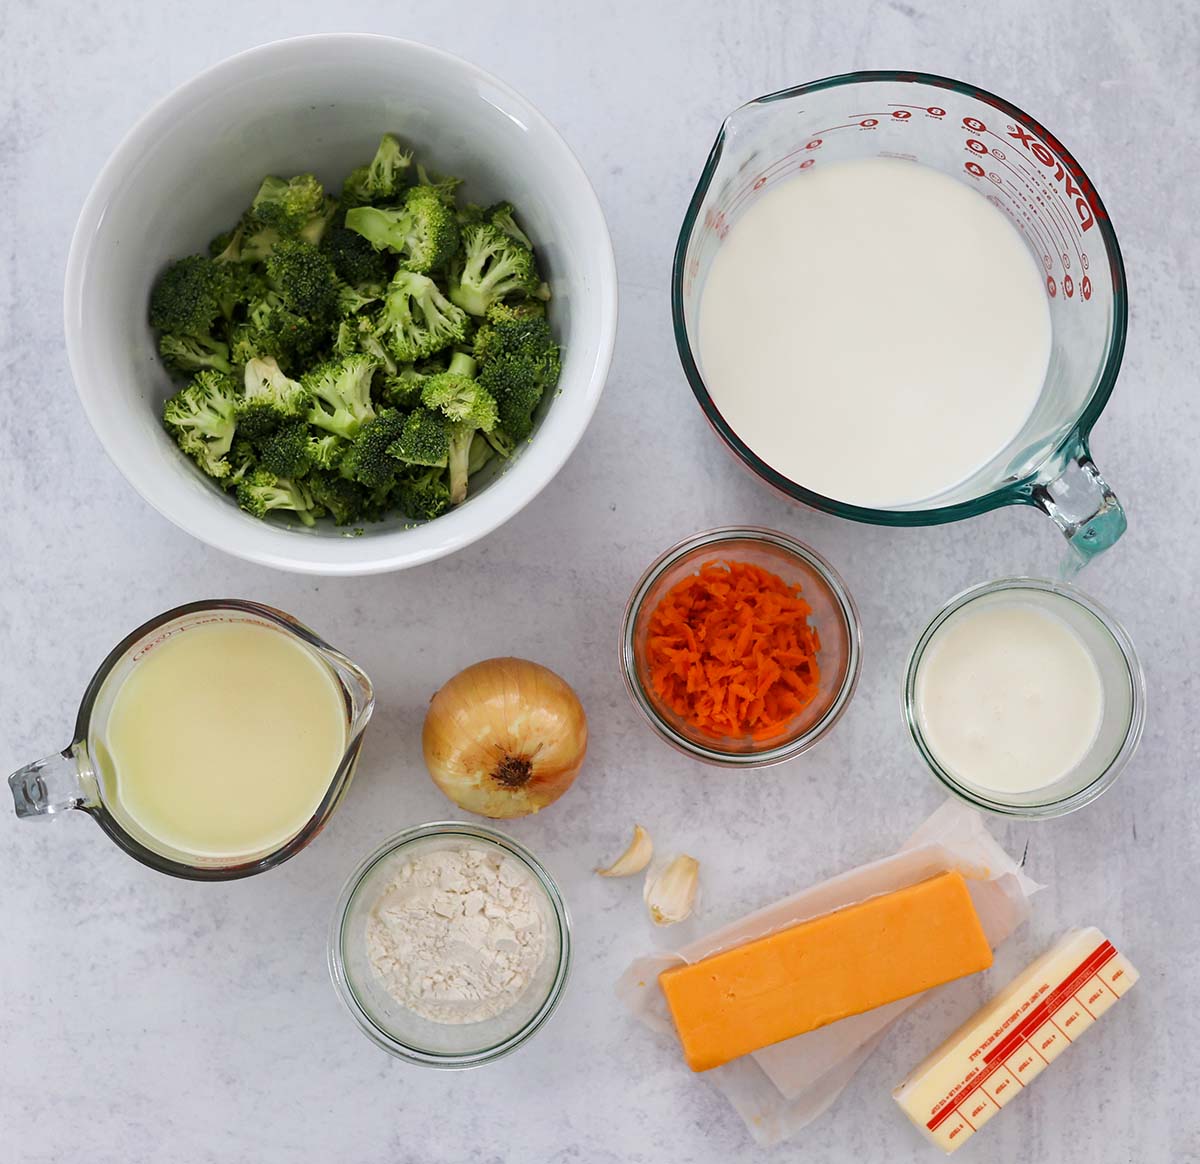 Ingredients for broccoli cheese soup. 